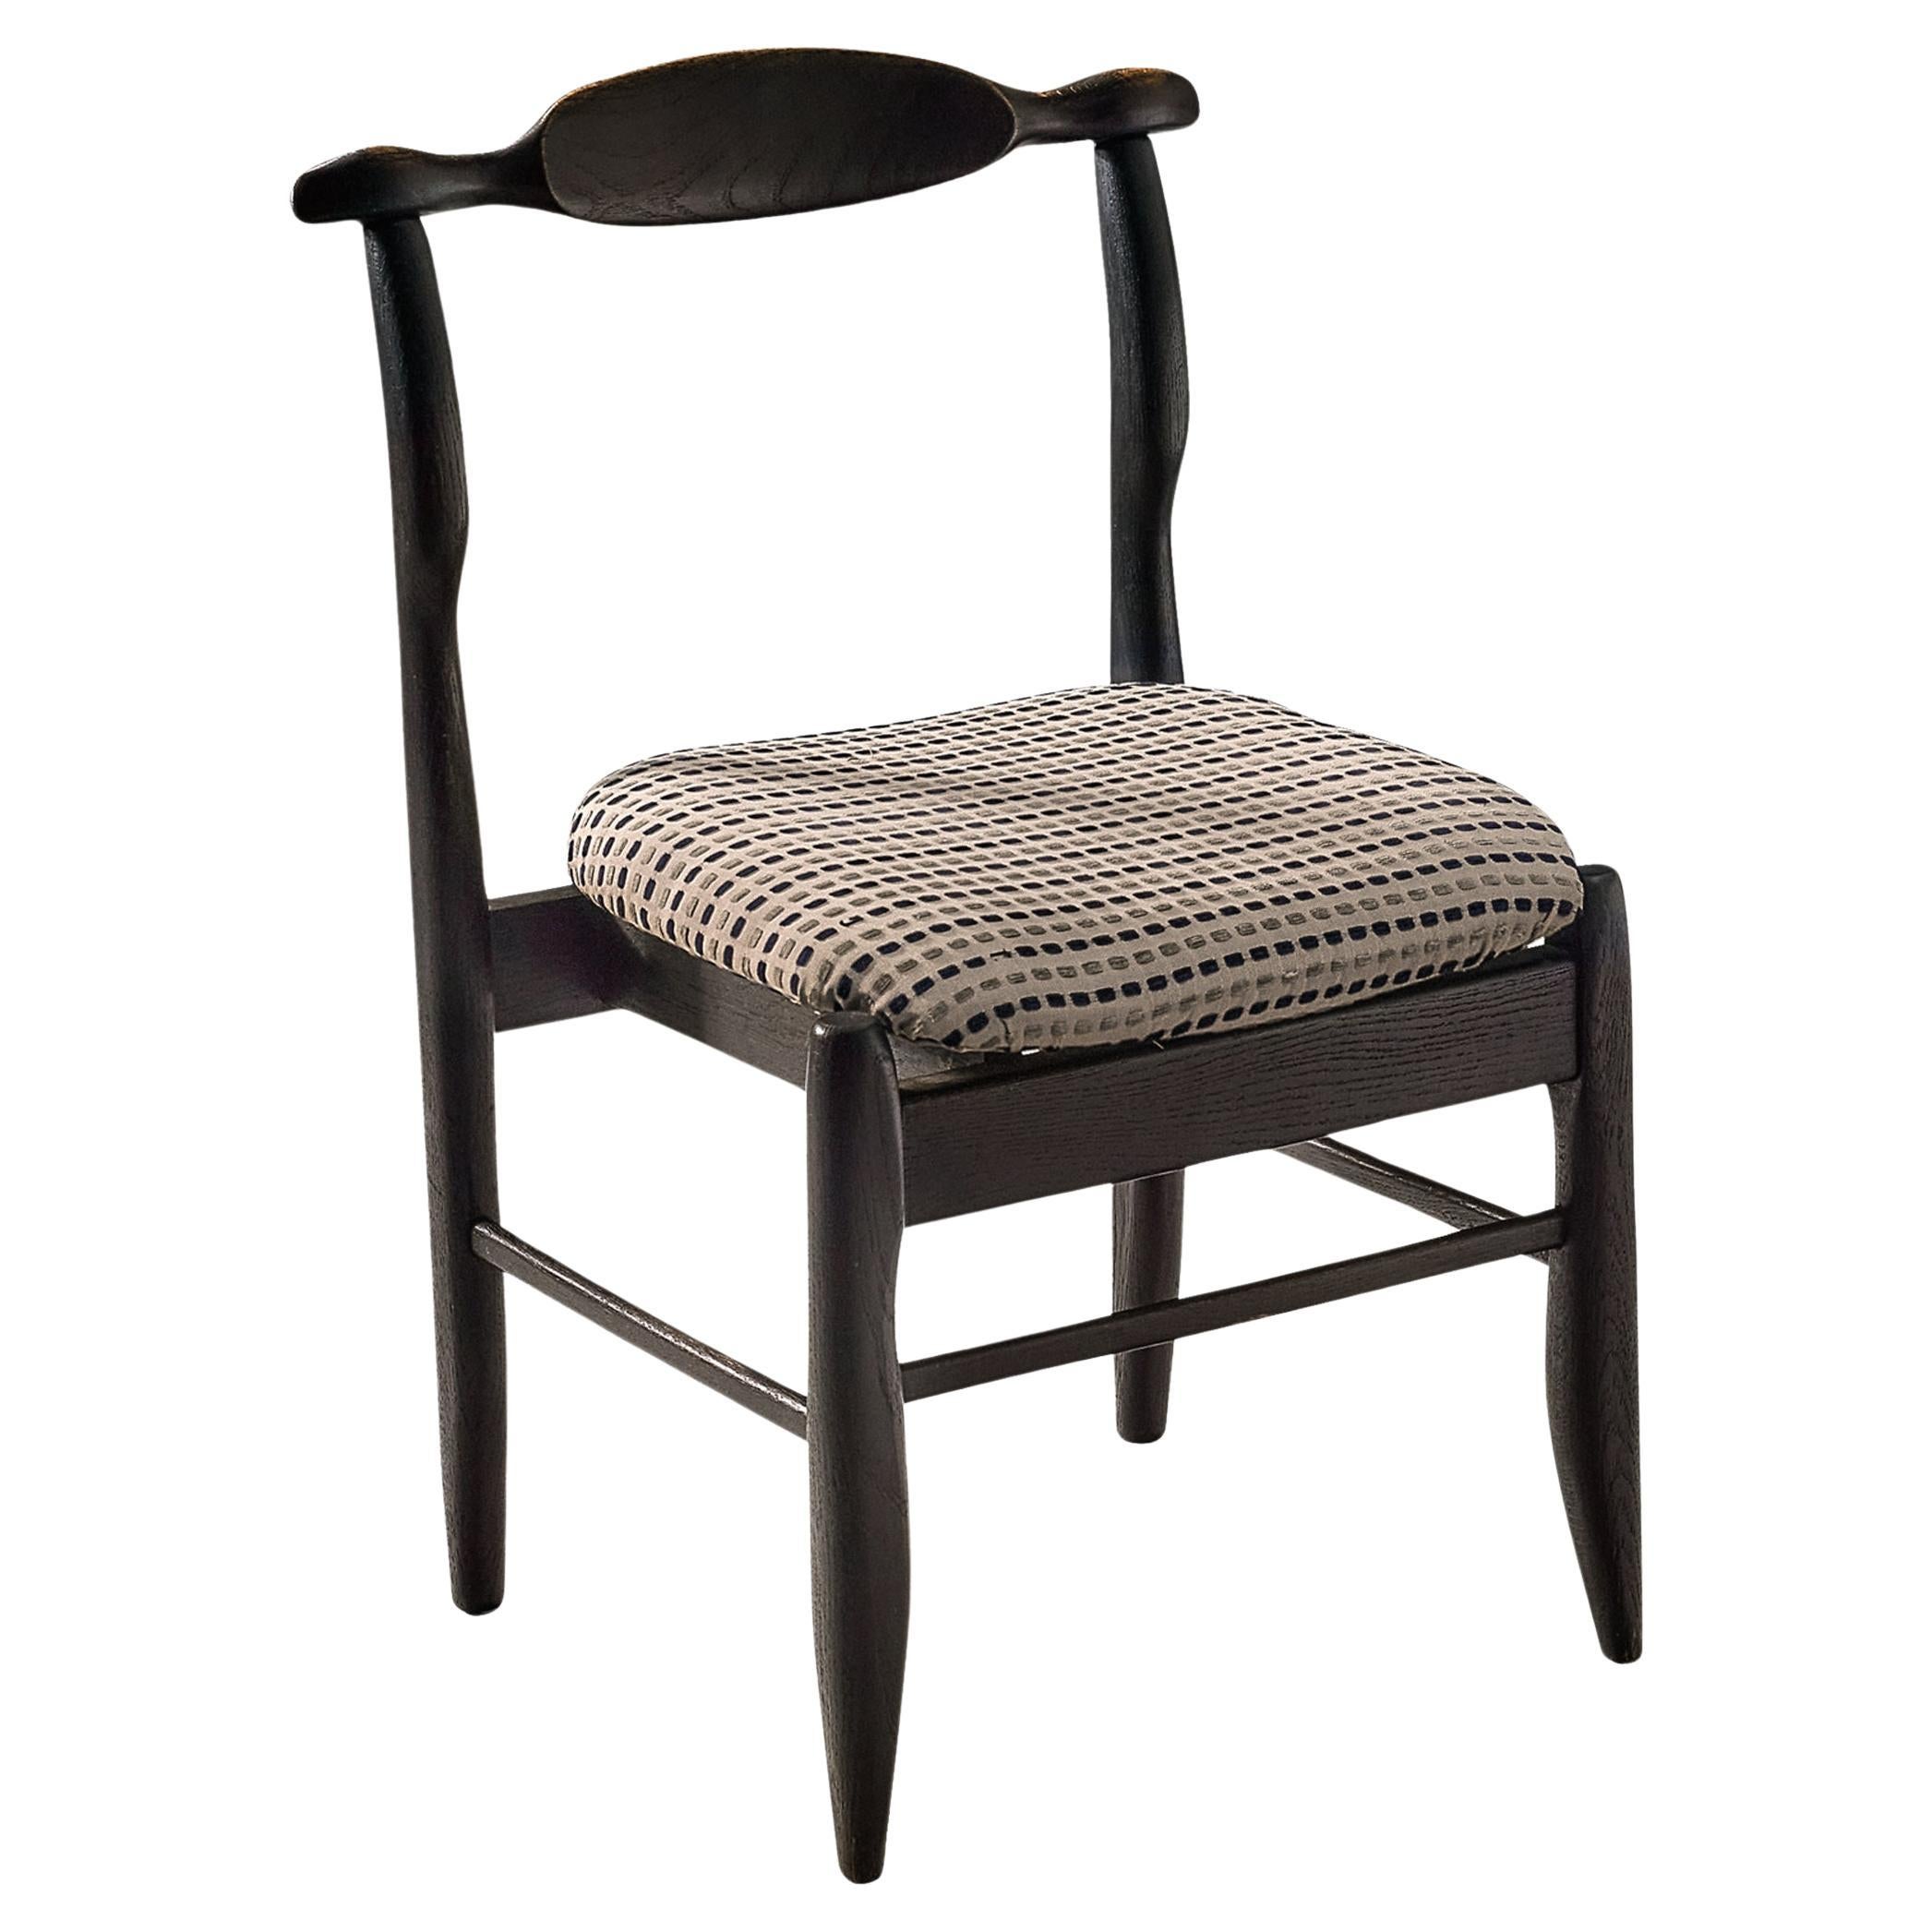 Guillerme & Chambron 'Fumay' Dining Chair in Black Lacquered Oak 